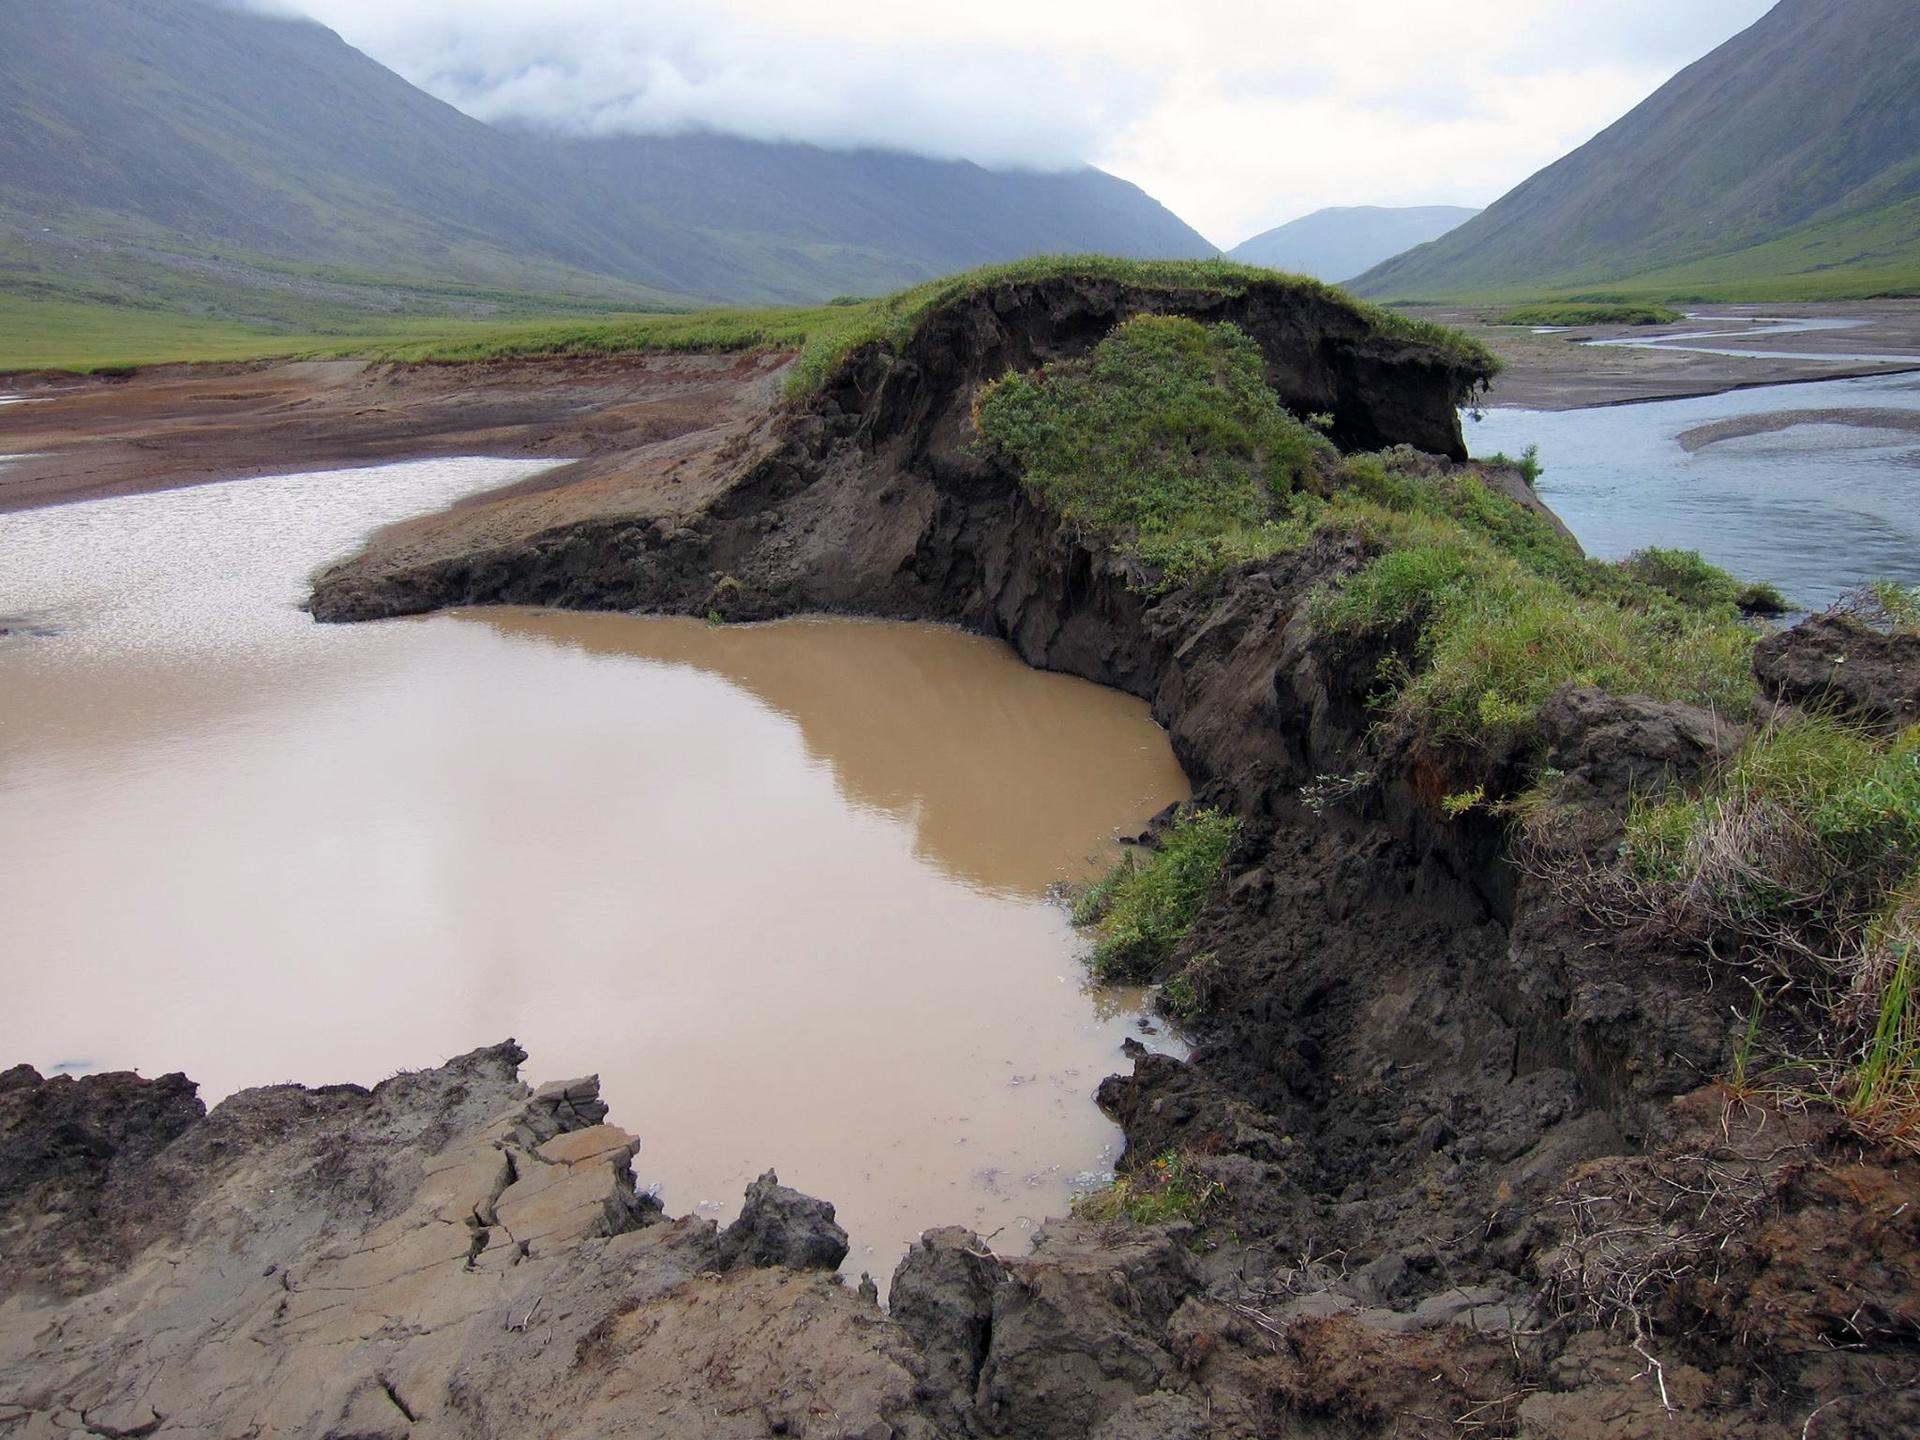 A bank of this lake thawed in the Gates of the Arctic National Park in Alaska, allowing the Okokmilaga River to cut through and drain it to sea.